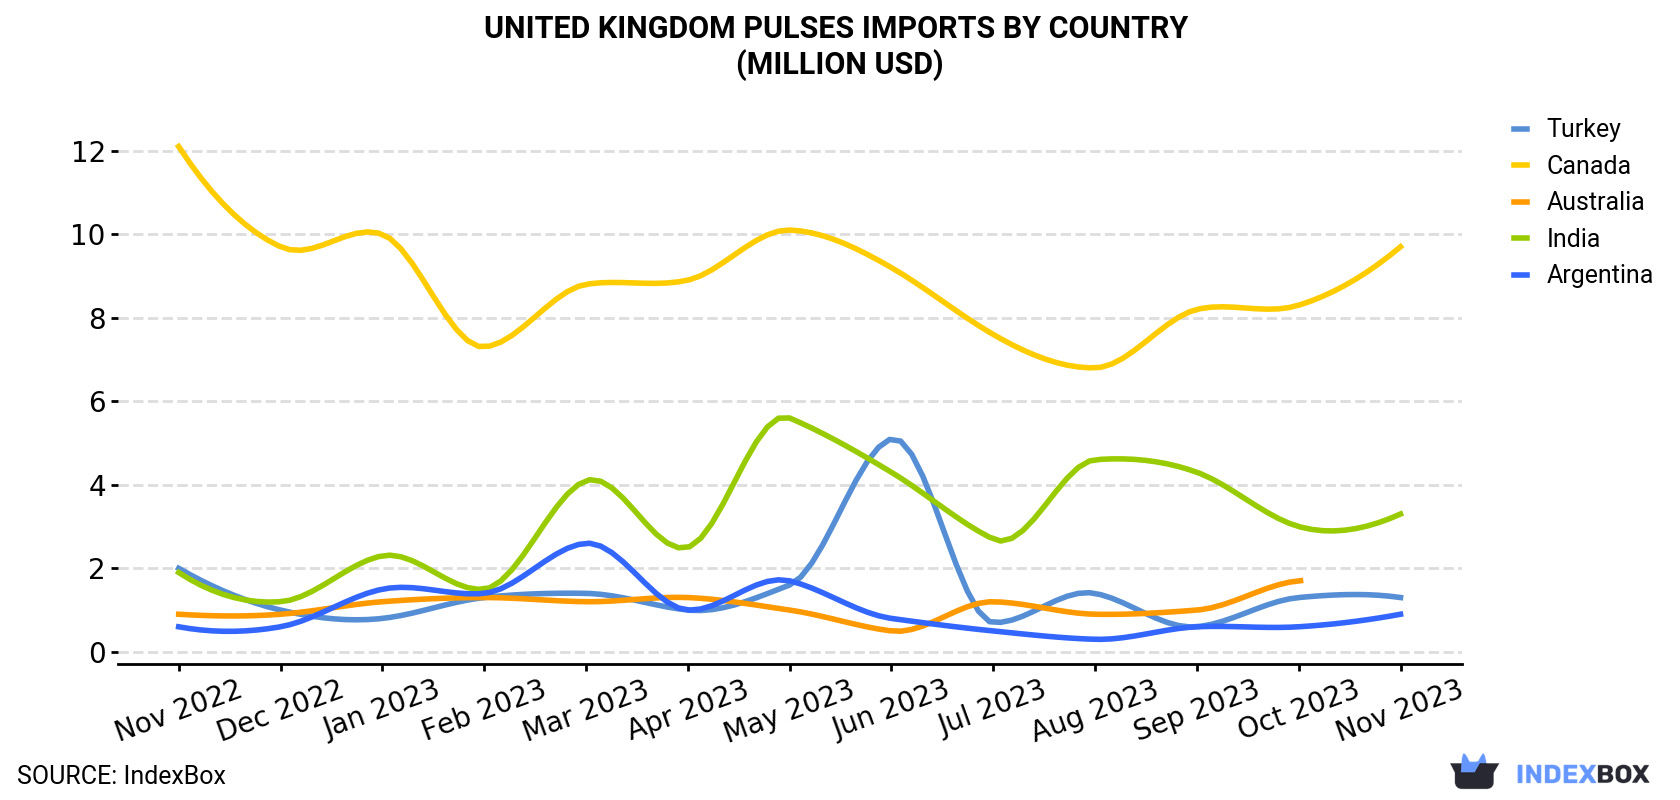 United Kingdom Pulses Imports By Country (Million USD)